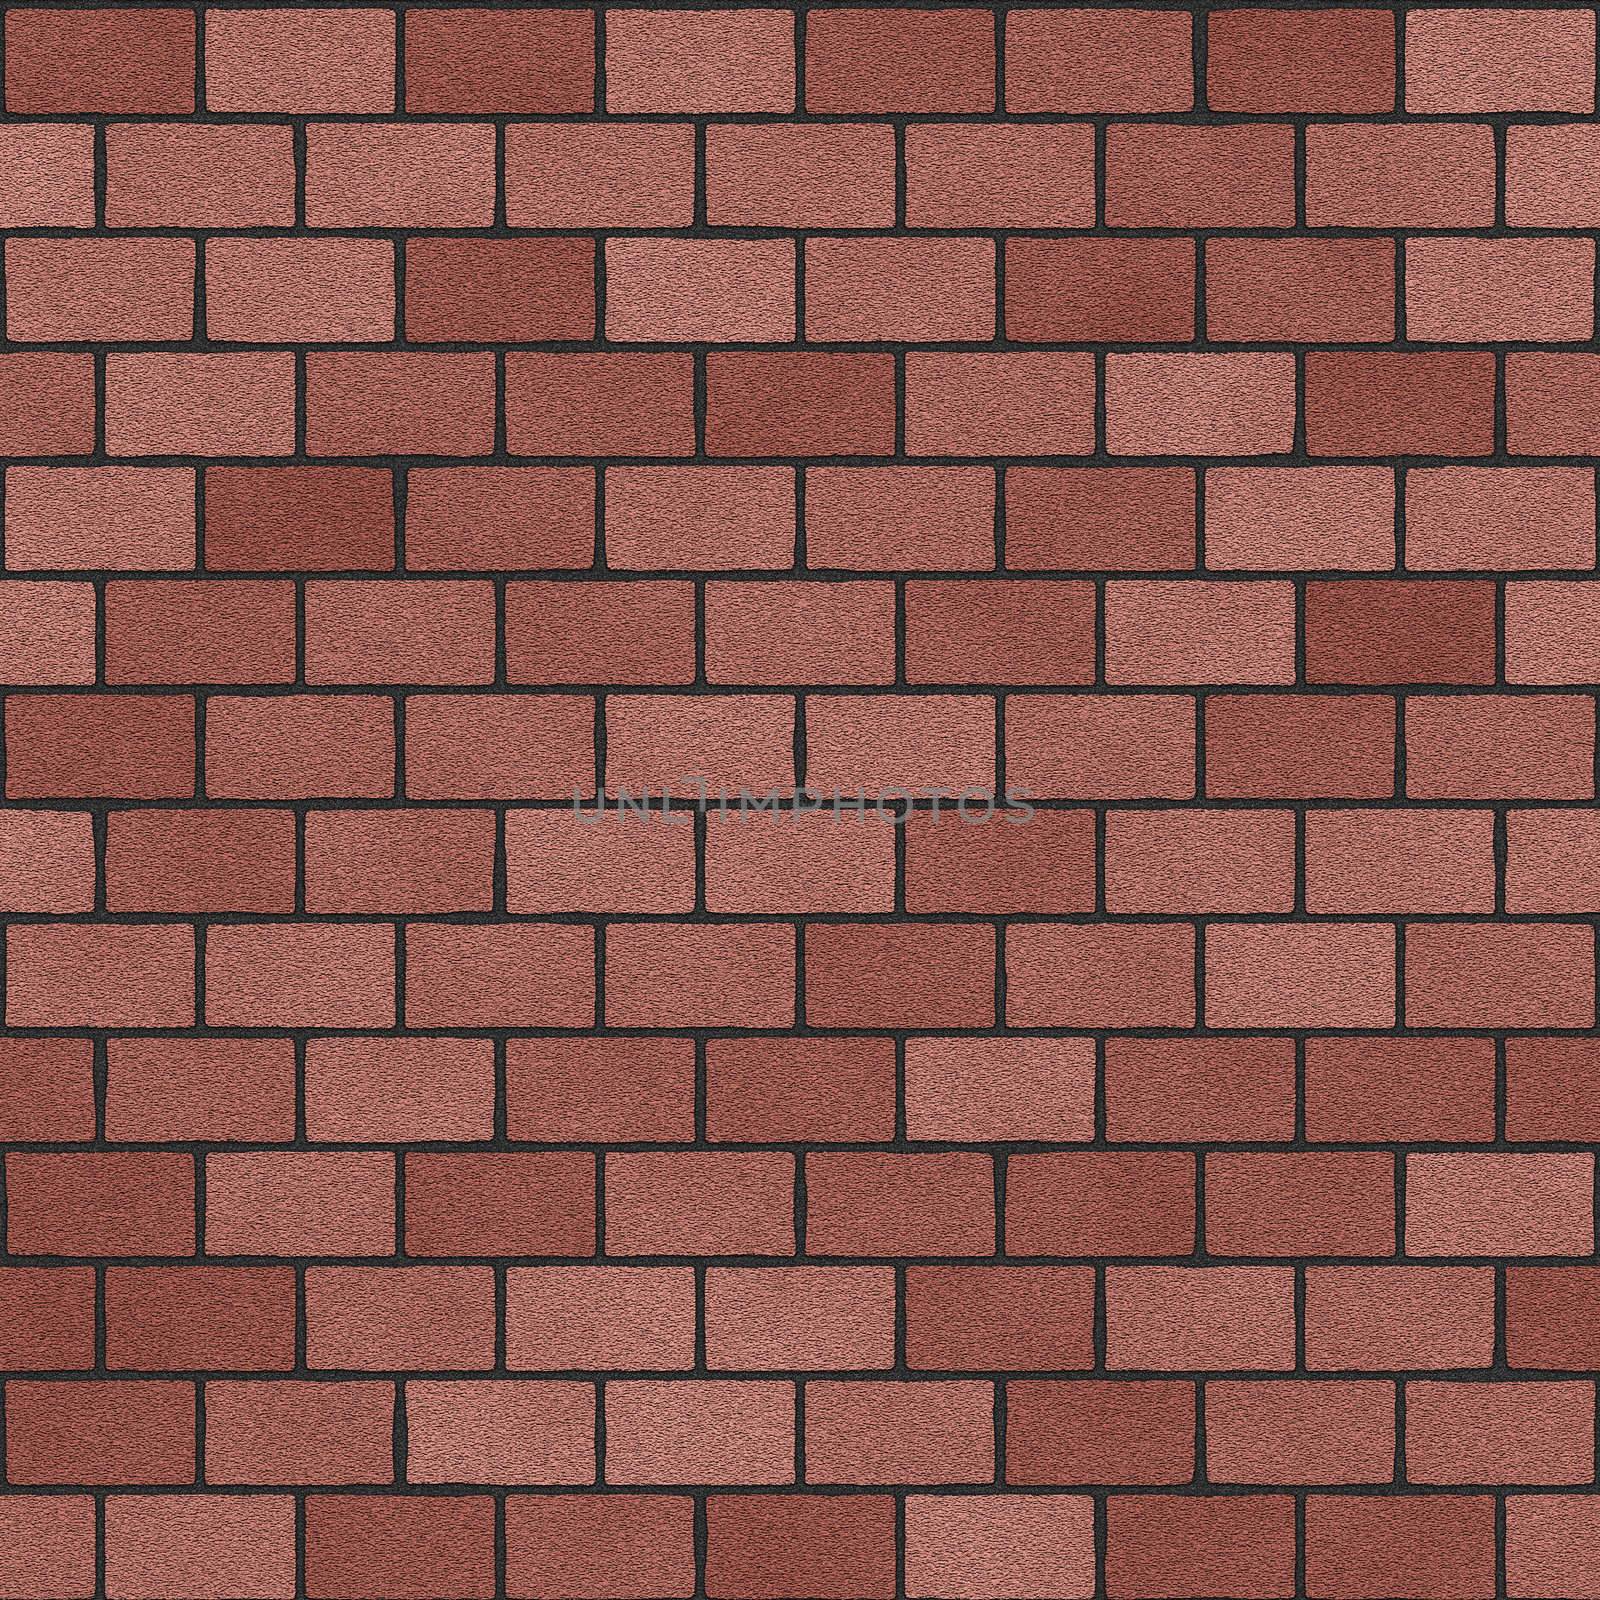 Brick pattern texture in shades of red